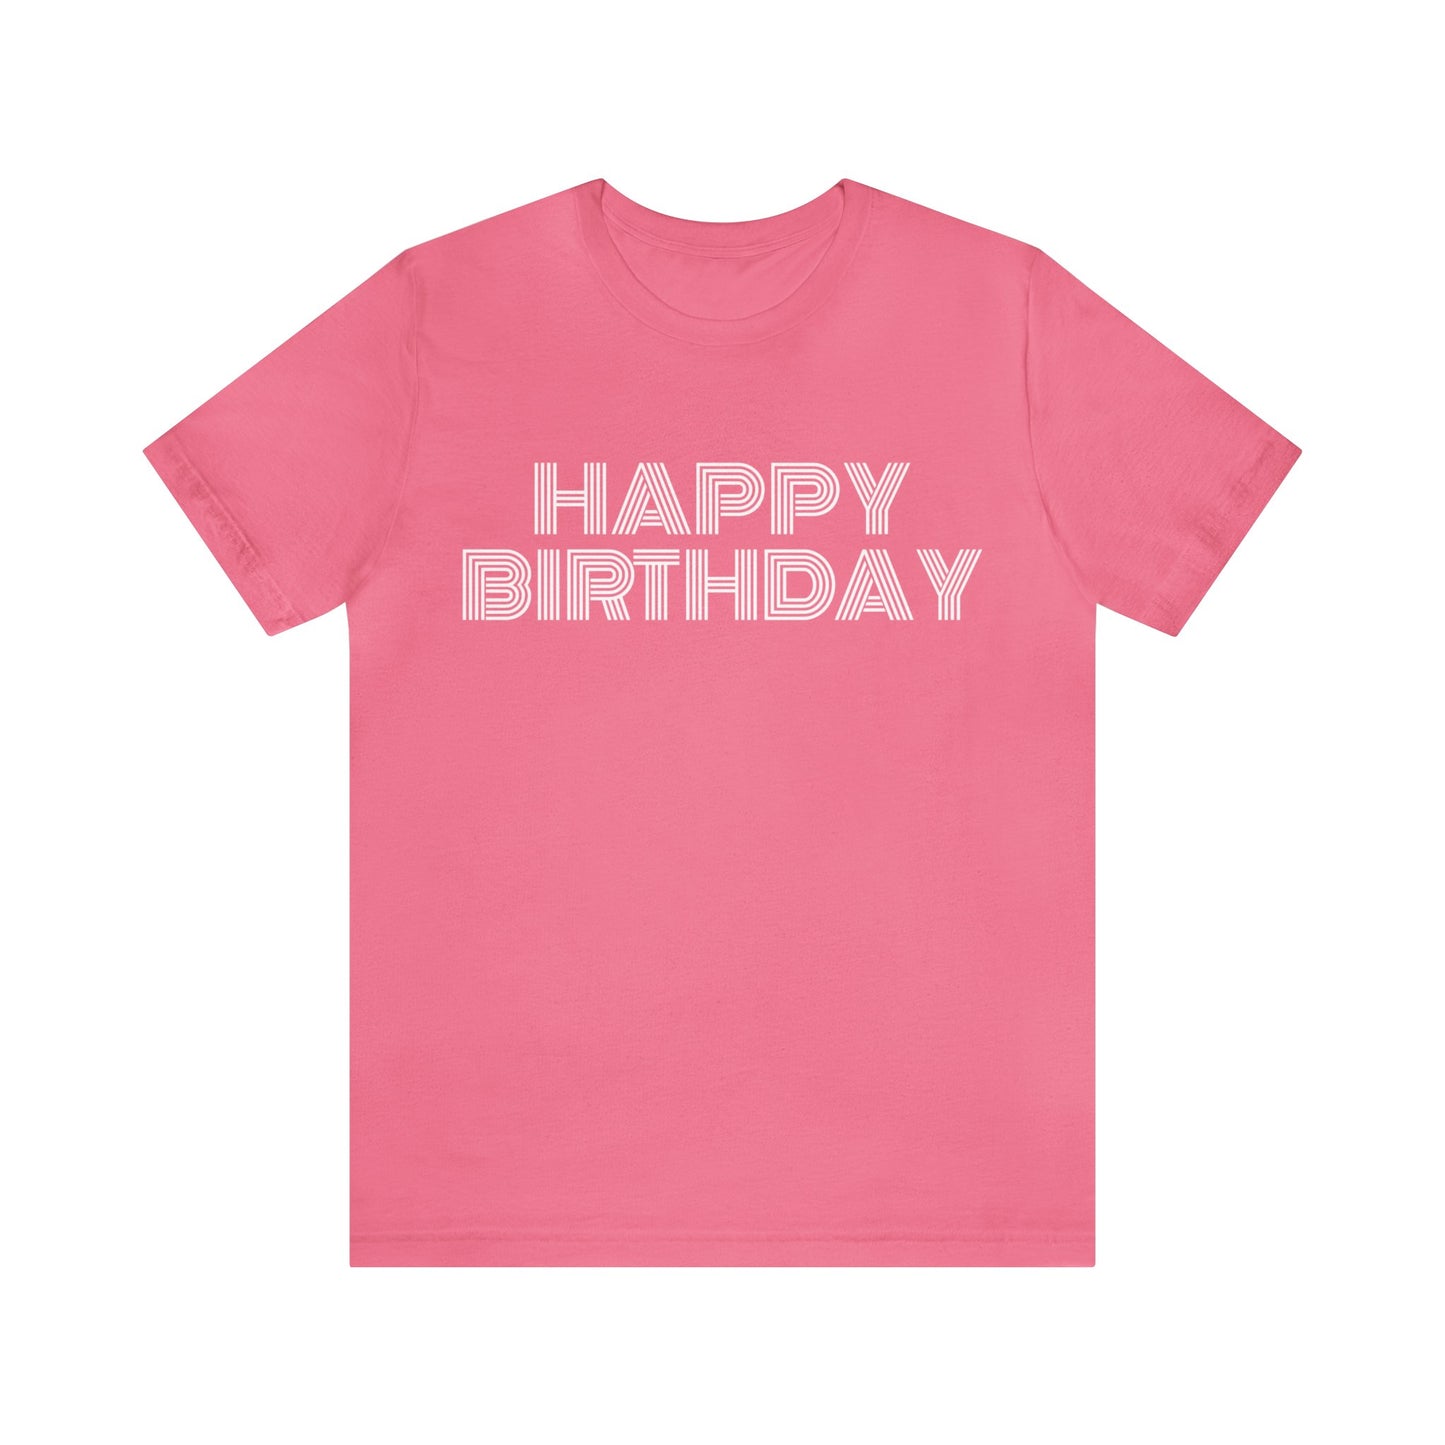 Charity Pink T-Shirt Tshirt Gift for Friends and Family Short Sleeve T Shirt Birthday Petrova Designs